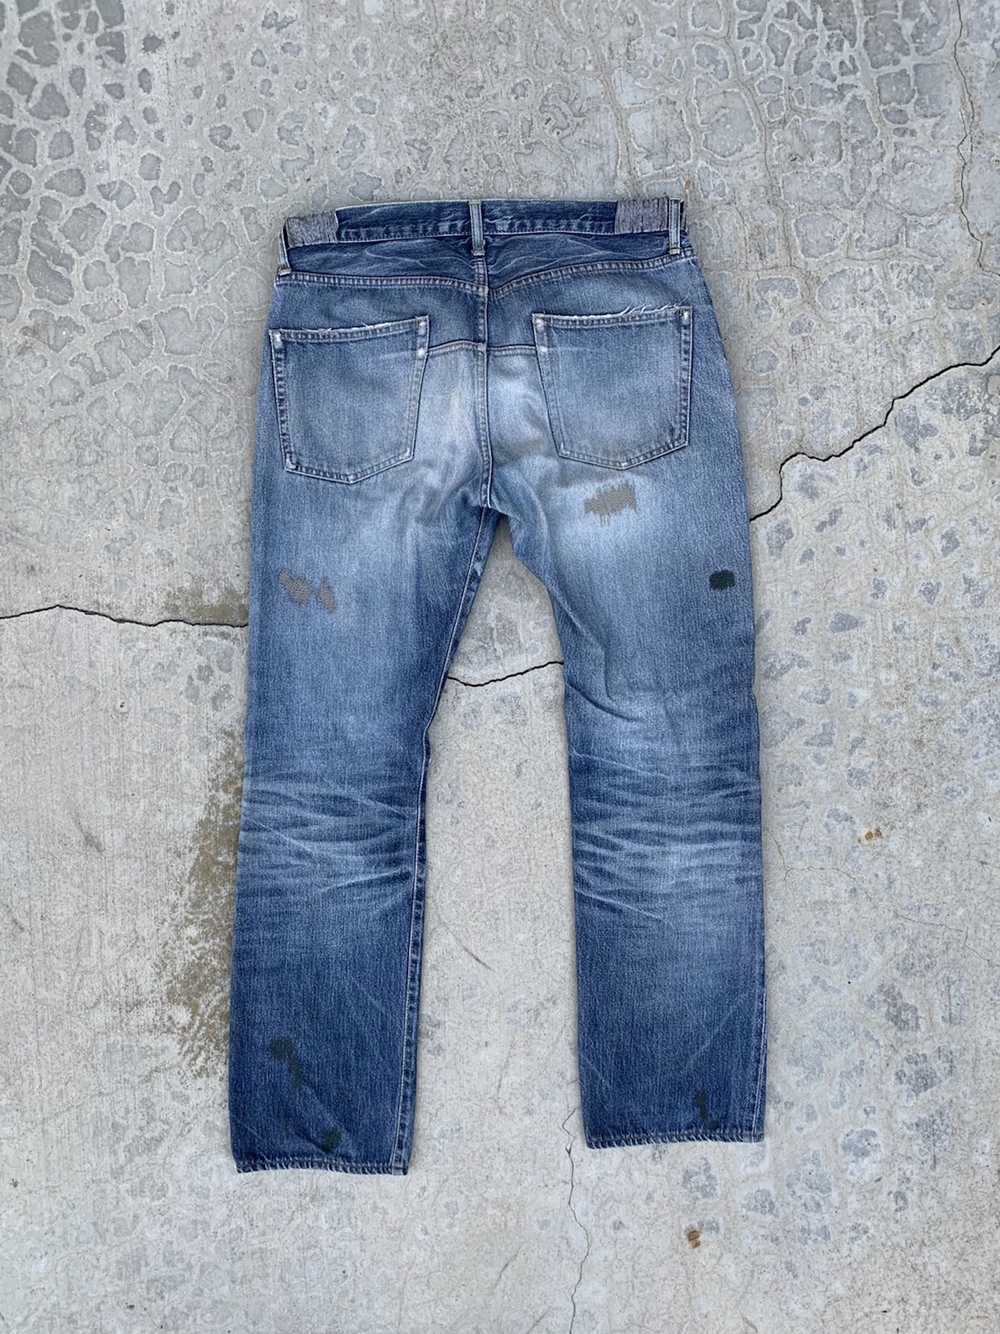 Undercover Undercover Bug Denim 06AW - image 2